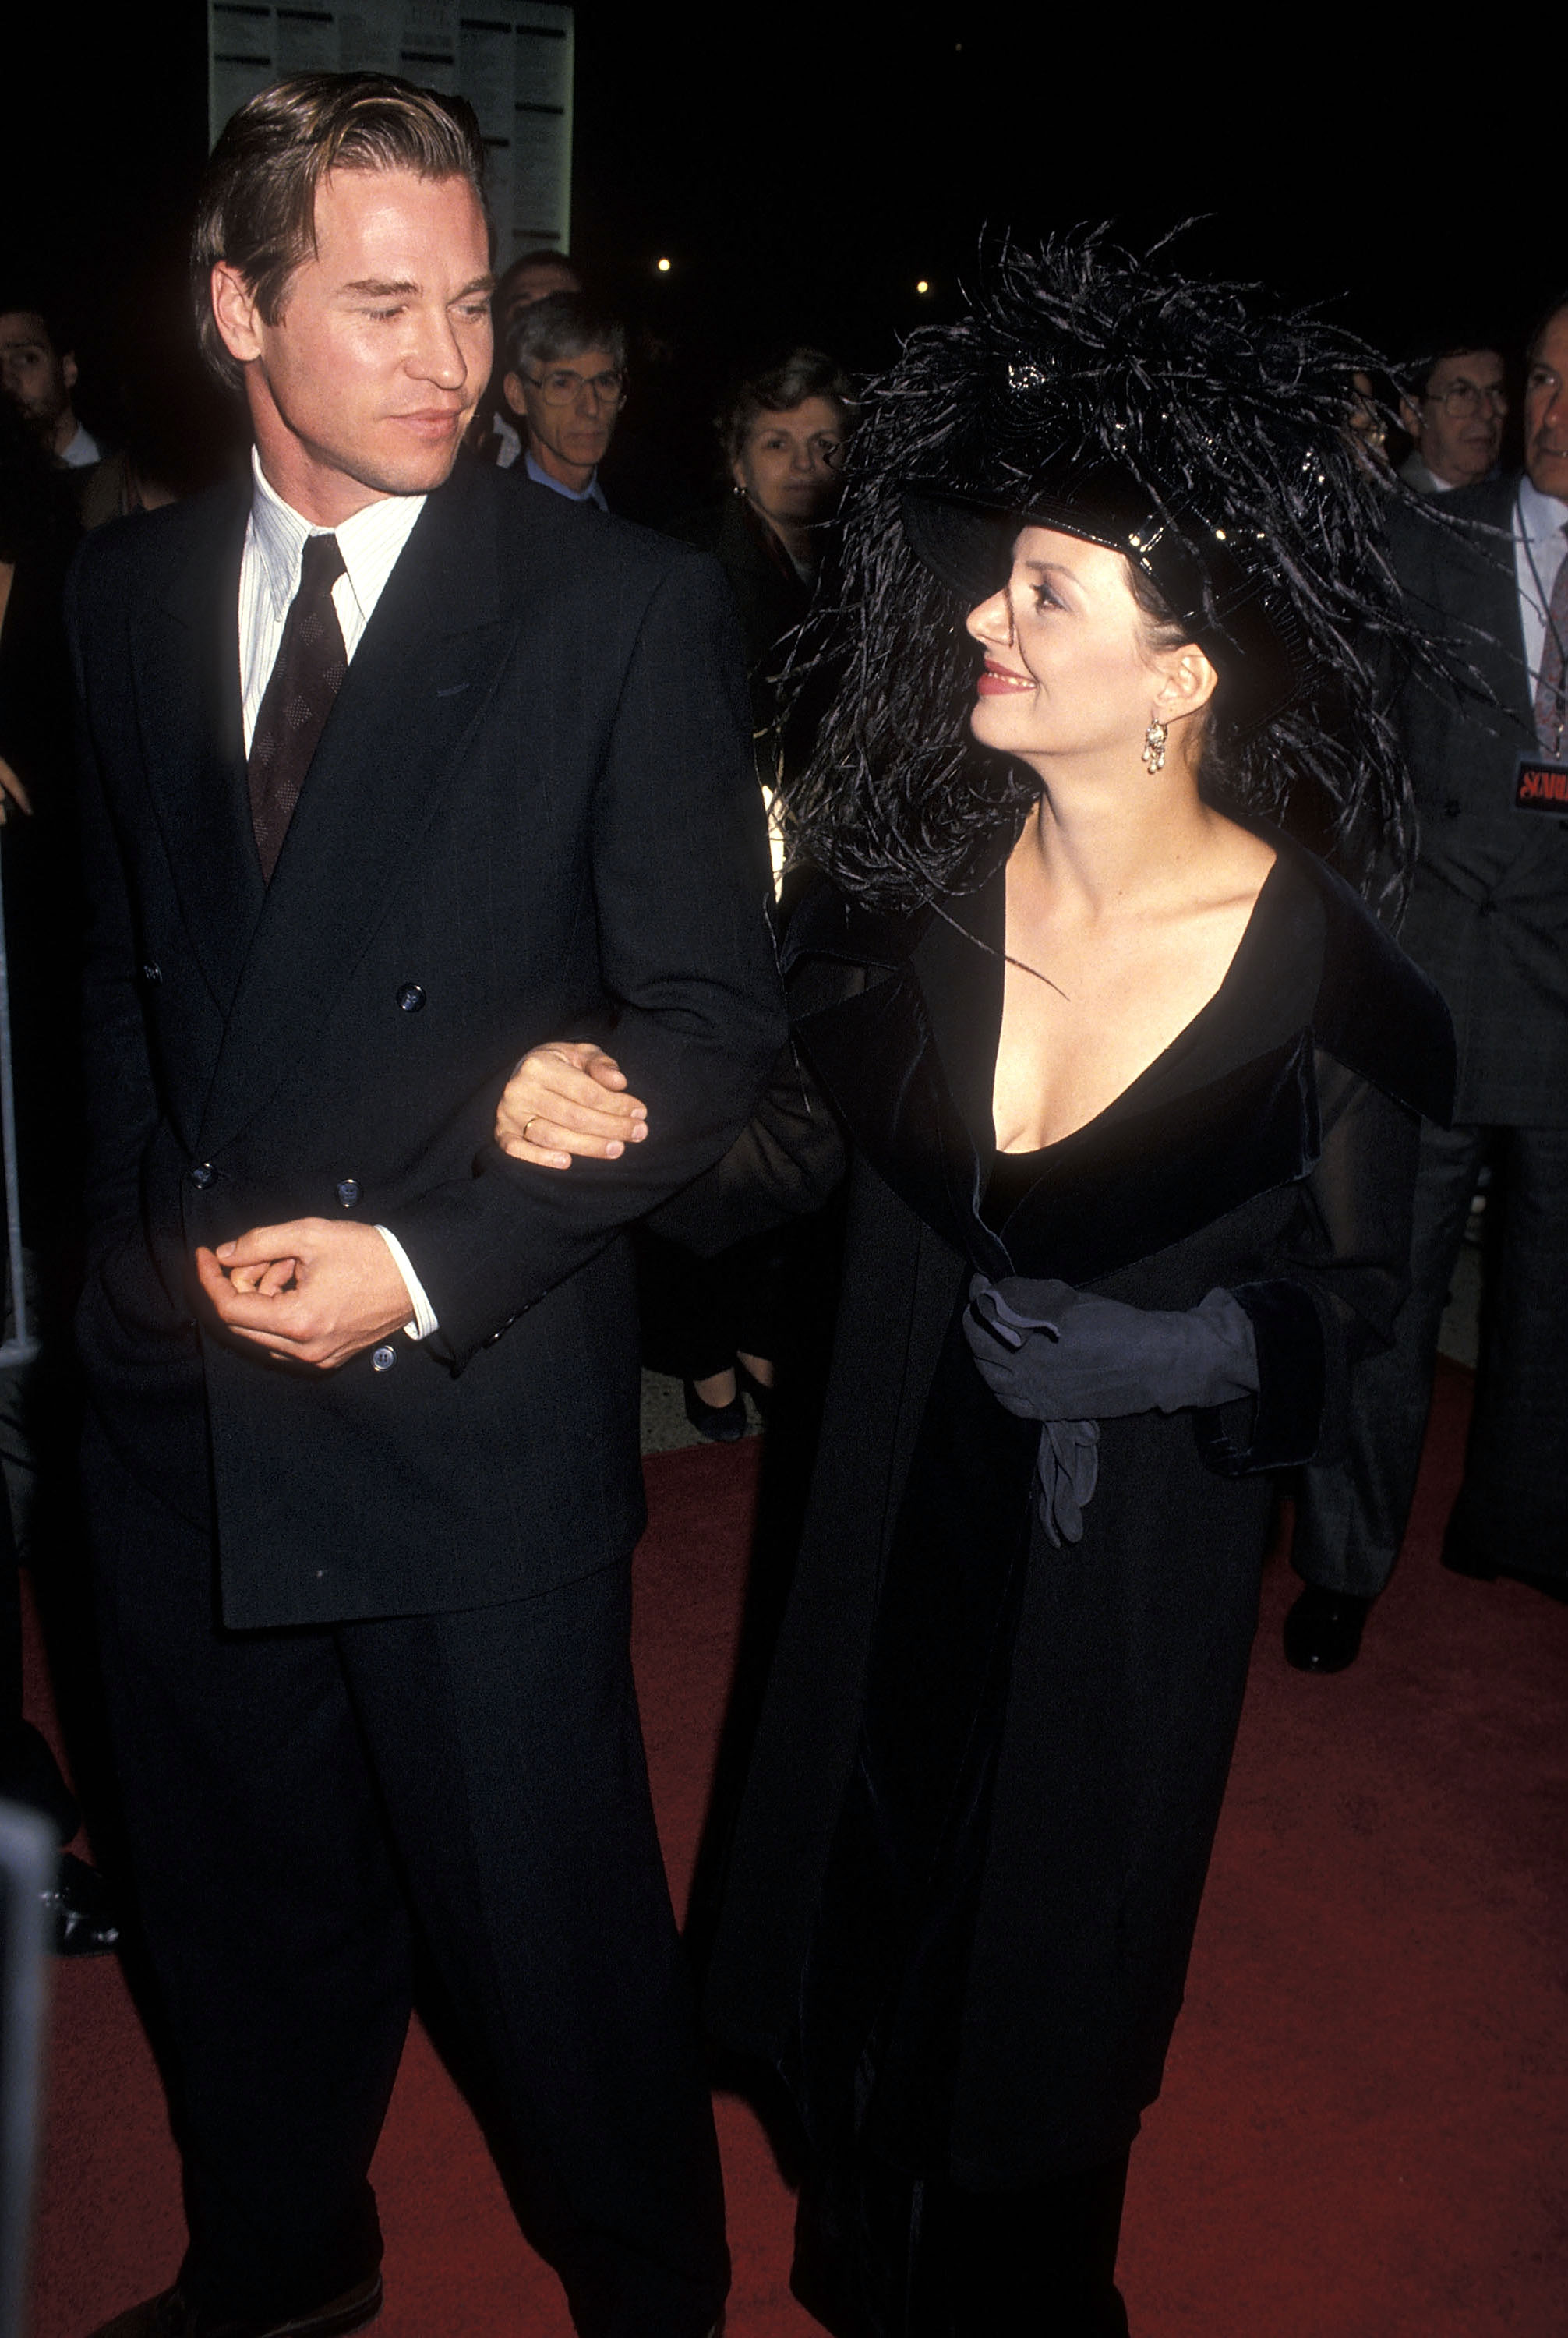 Val Kilmer and Joanne Whalley at the "Scarlett" screening on November 3, 1994 | Source: Getty Images